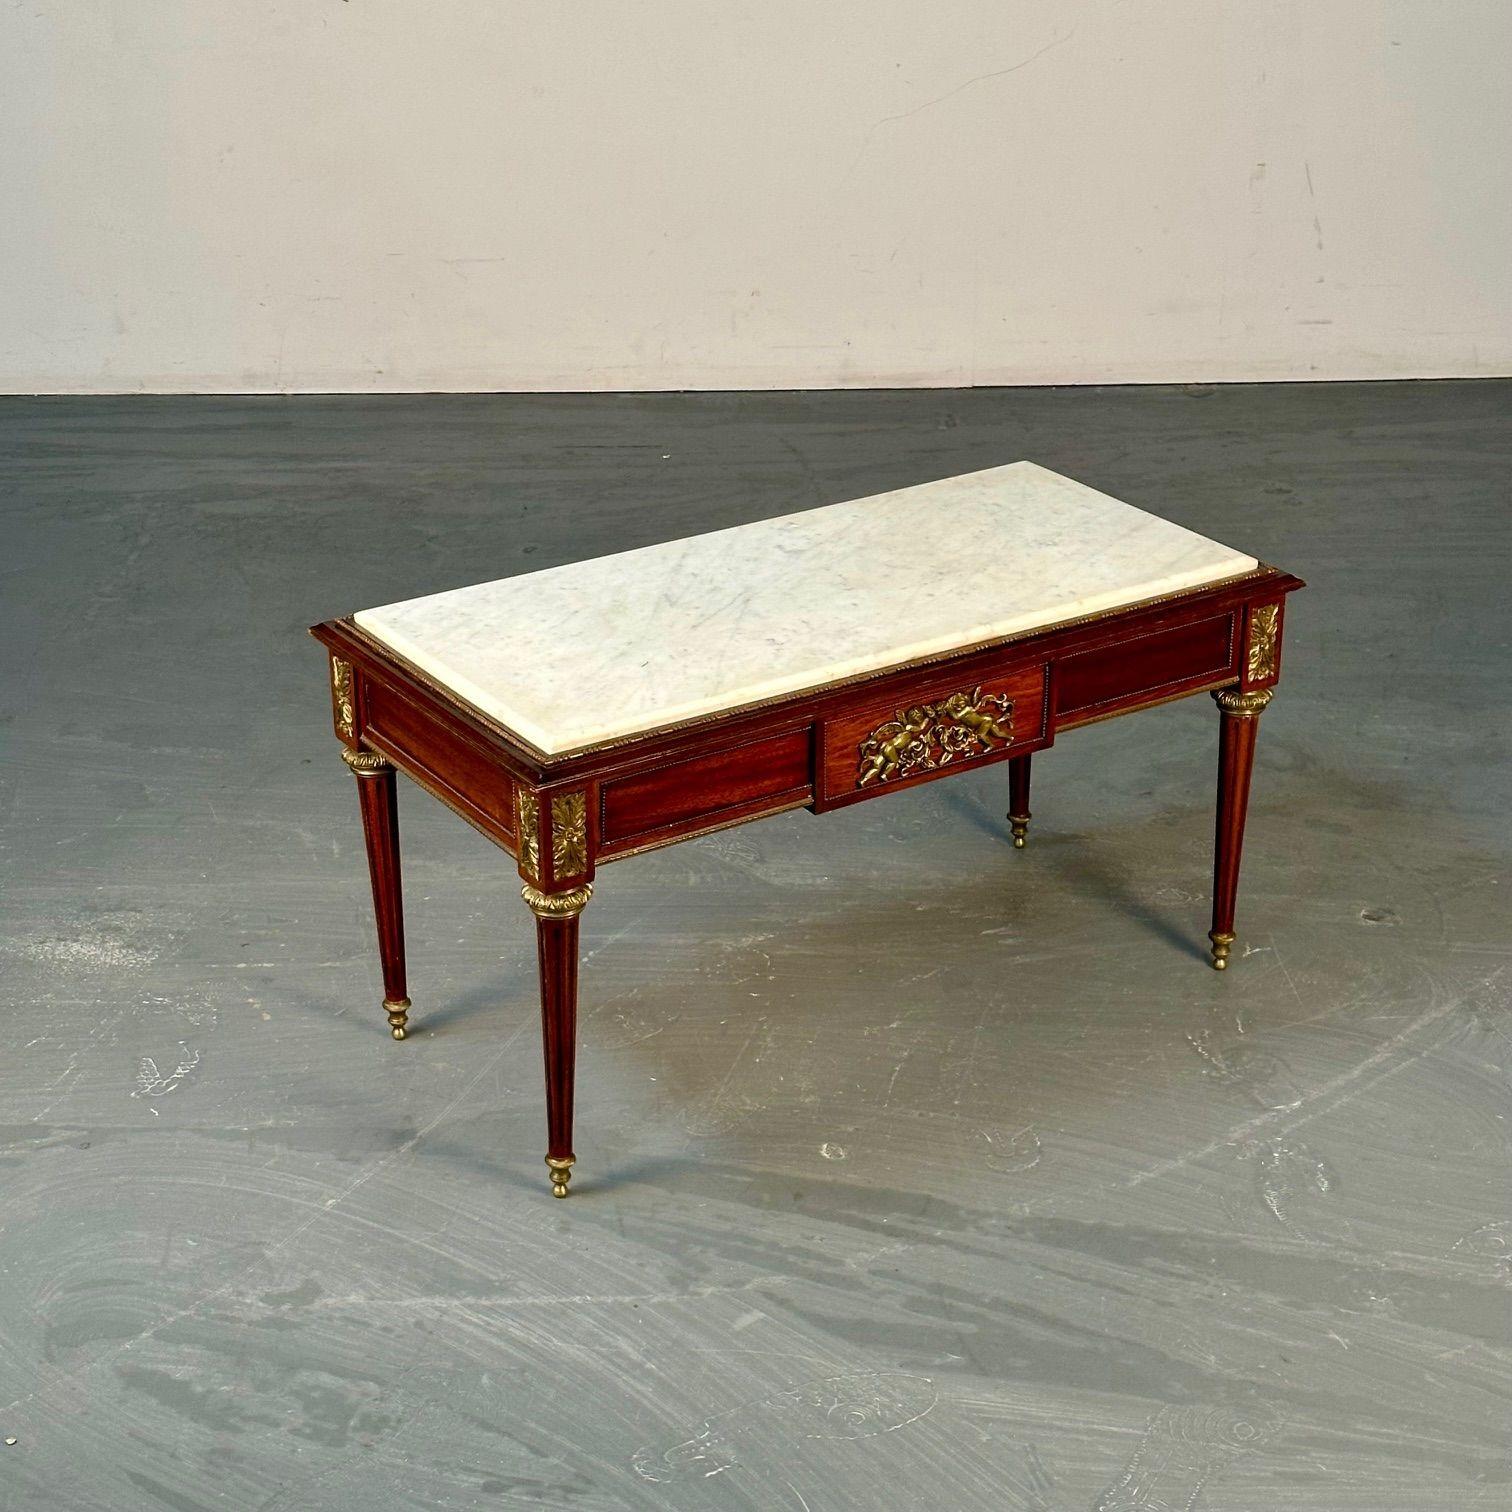 20th Century Louis XVI Style, Small Coffee Table, Mahoagany, Bronze, White Marble, 1960s For Sale